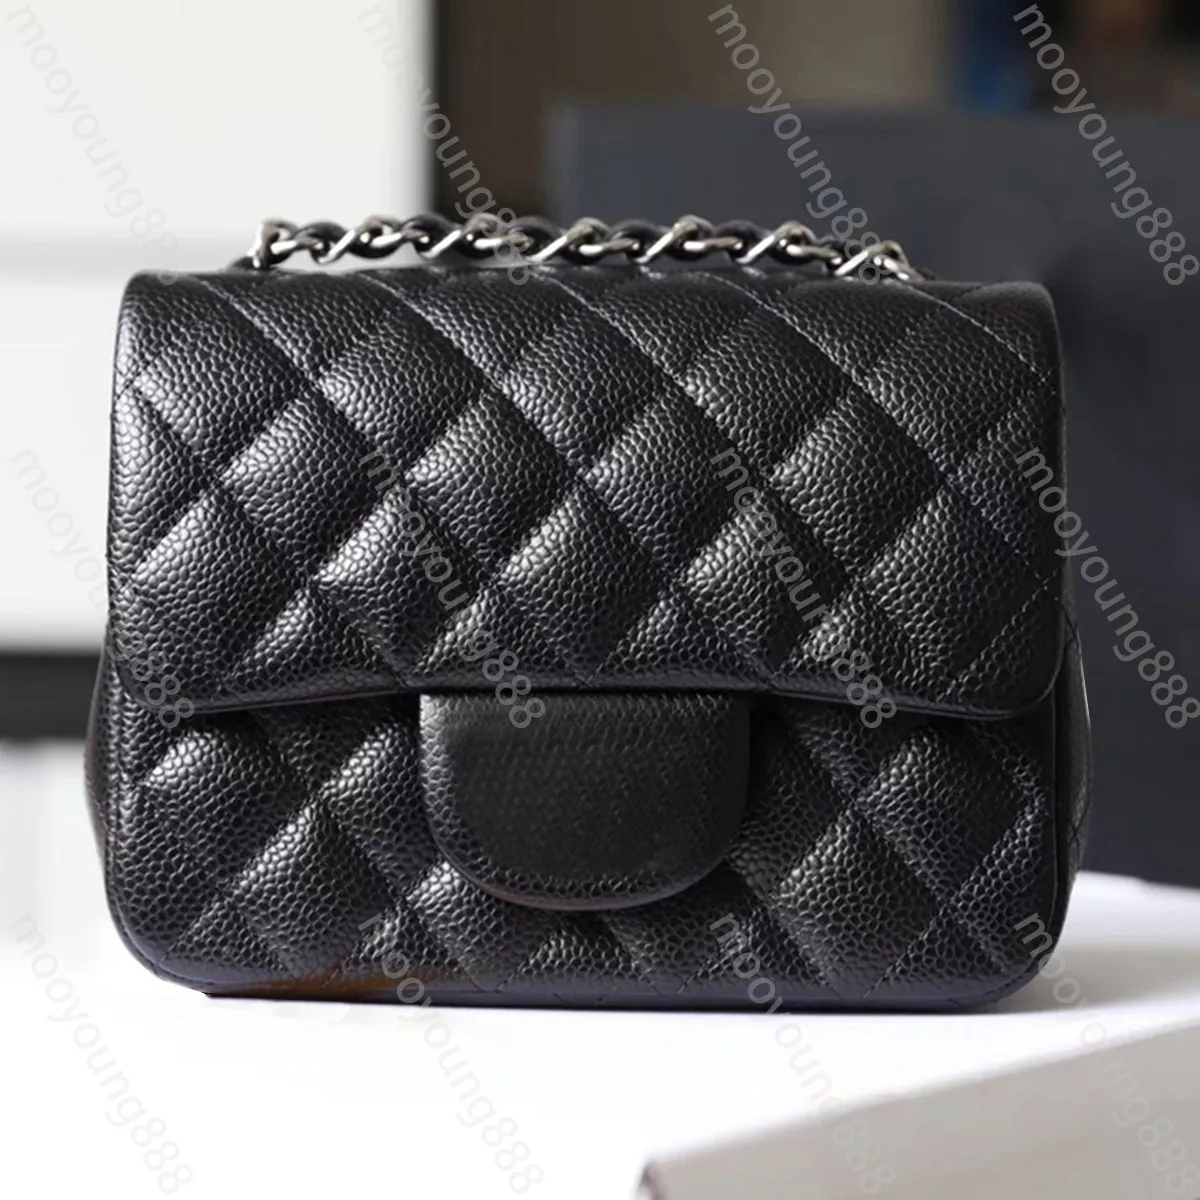 10a Top Tier Quality Luxury Designer Mini Square Flap Bag Real Leather Caviar Lambskin Classic Black Purse quiltade hangbags Crossbody Shoulder Gold Chain Box Påsar